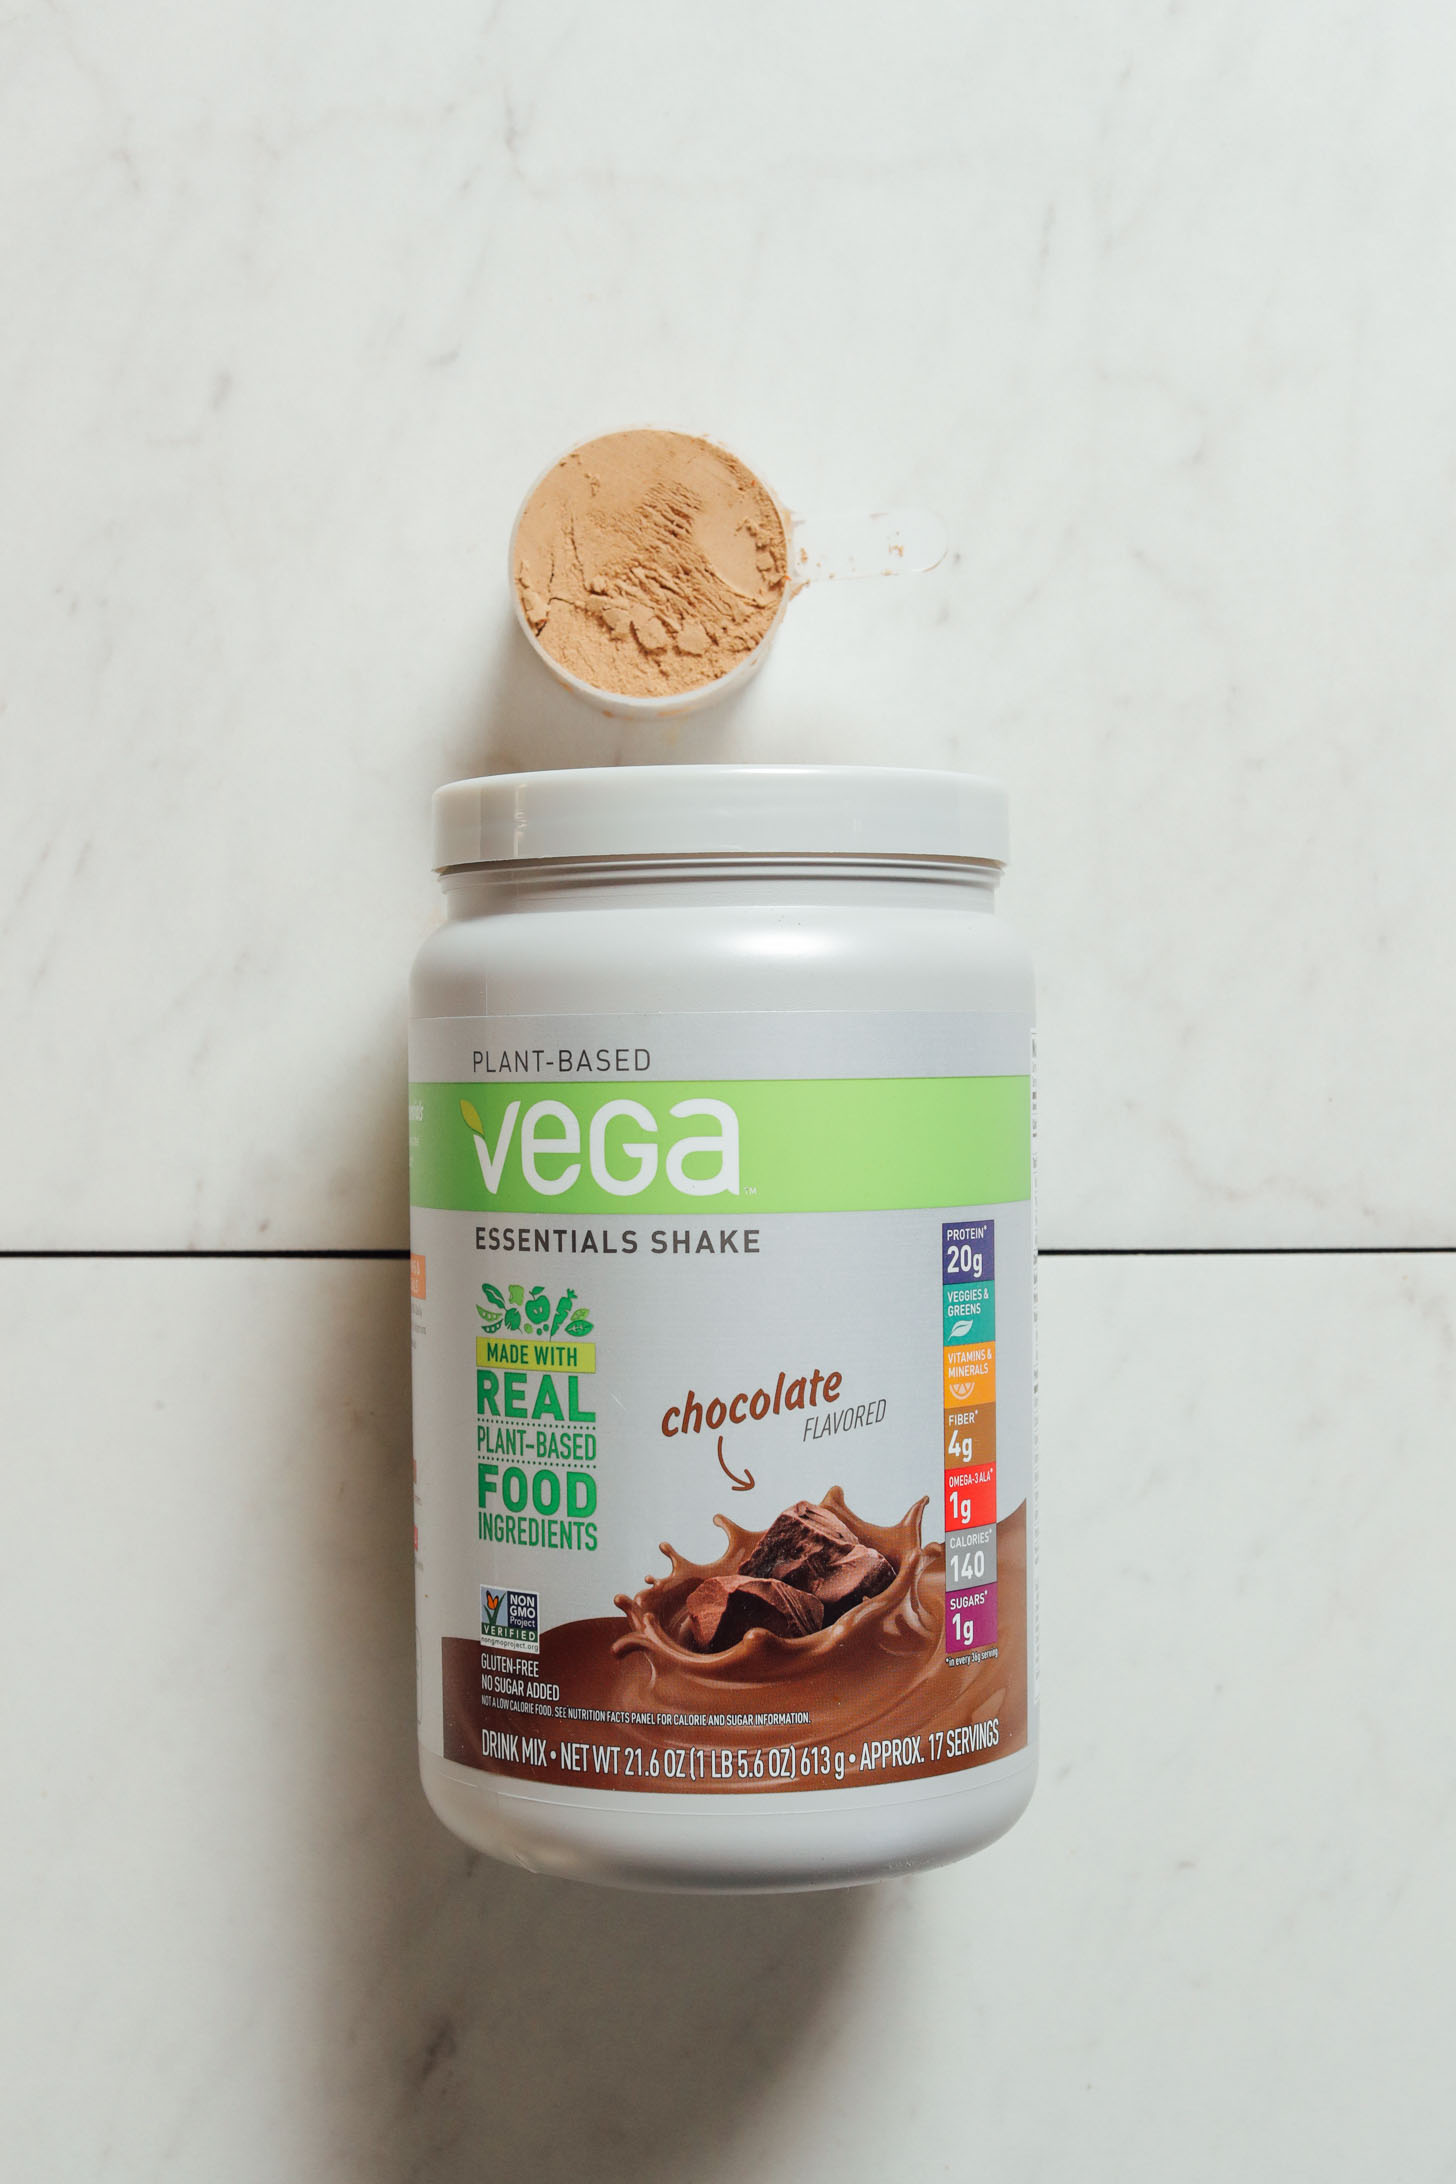 Tub and scoop of Vega Chocolate Protein Powder for our unbiased protein powders review